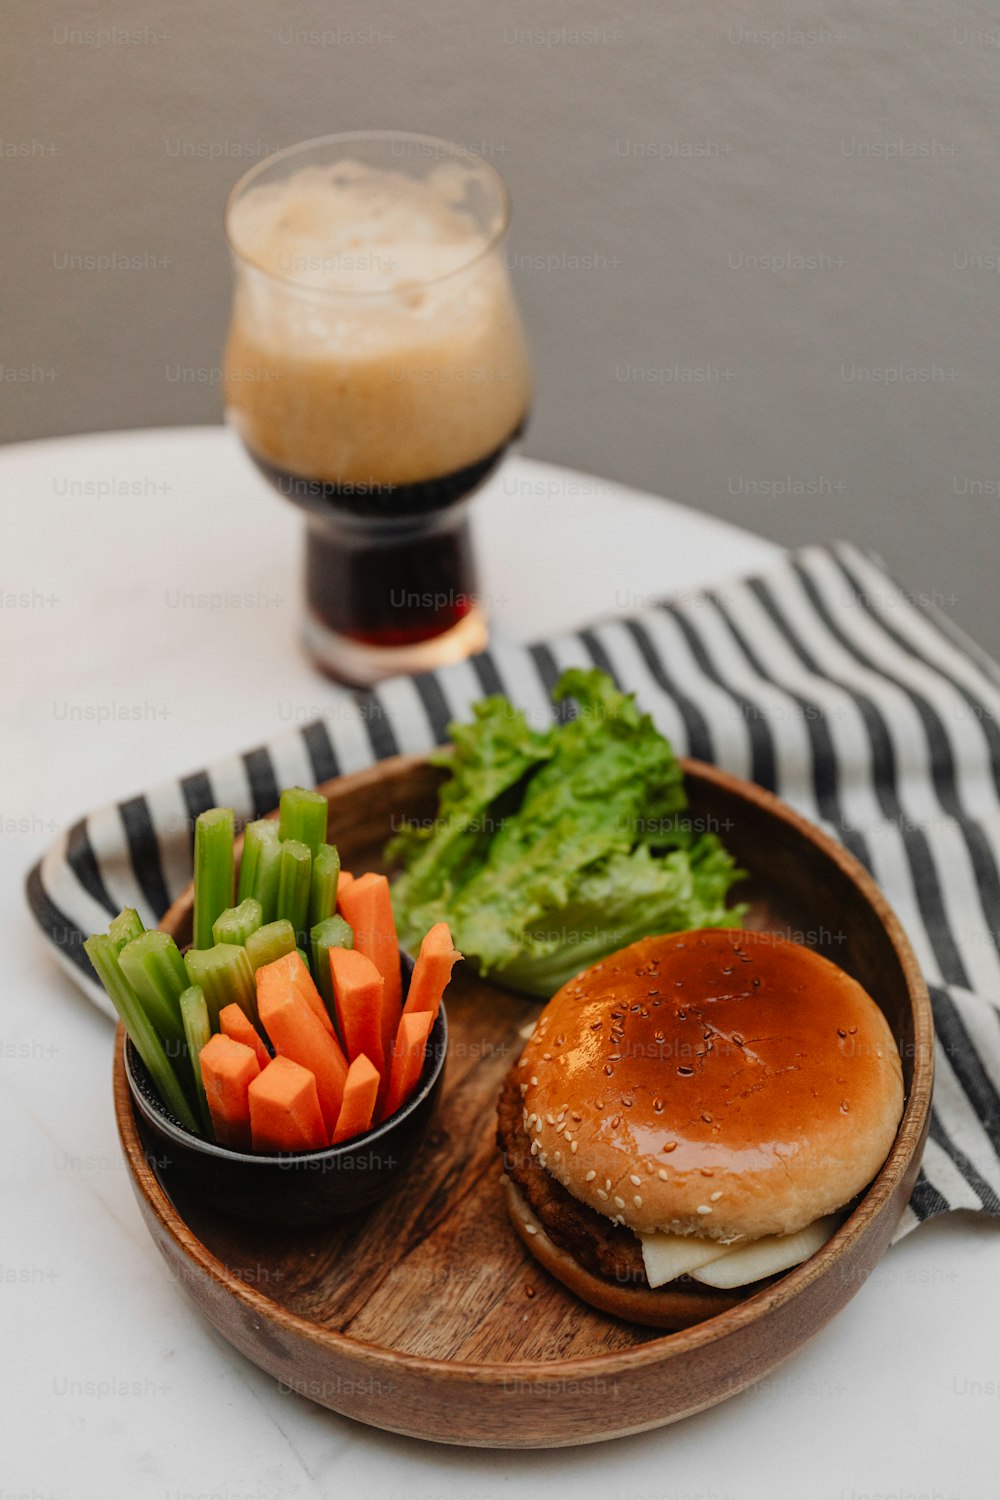 a plate with a burger, carrots and celery on it